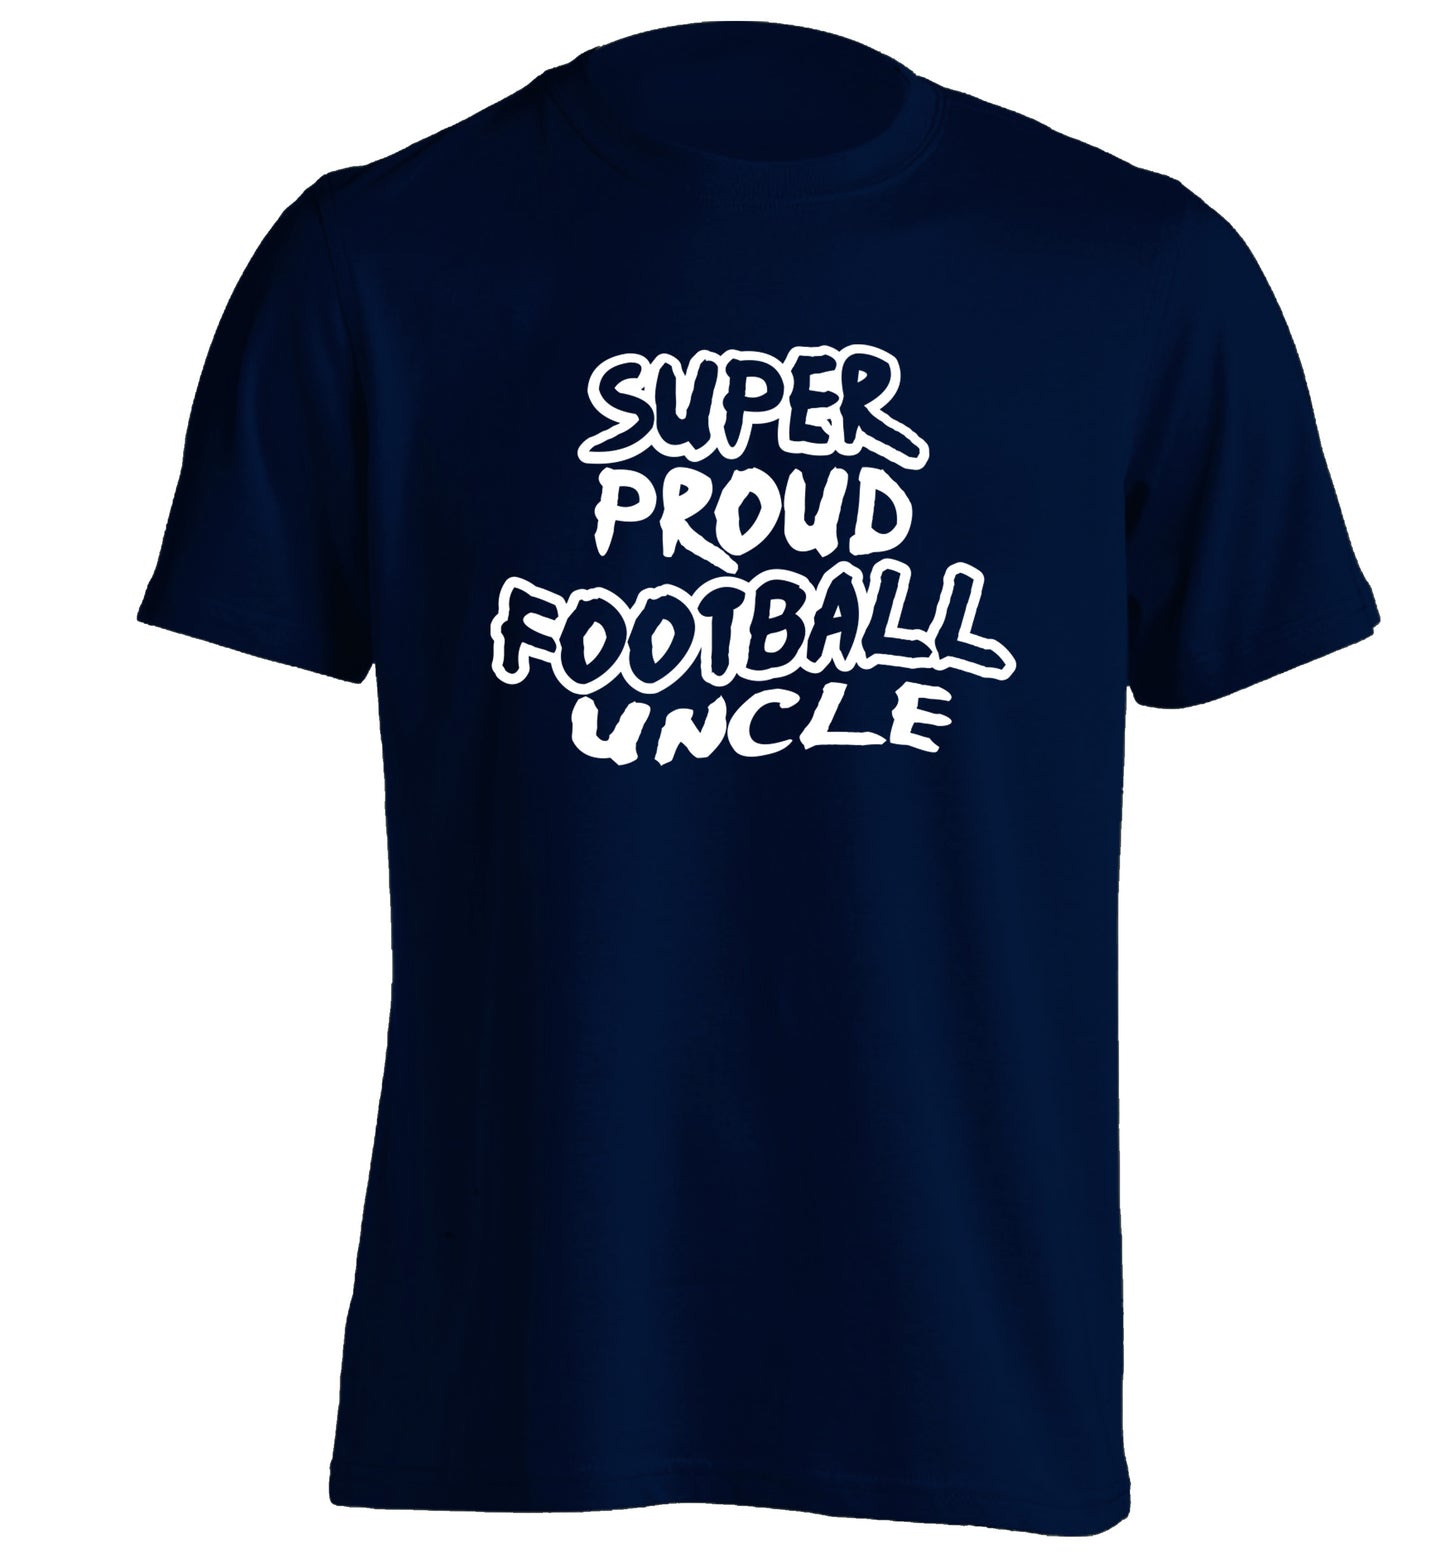 Super proud football uncle adults unisexnavy Tshirt 2XL